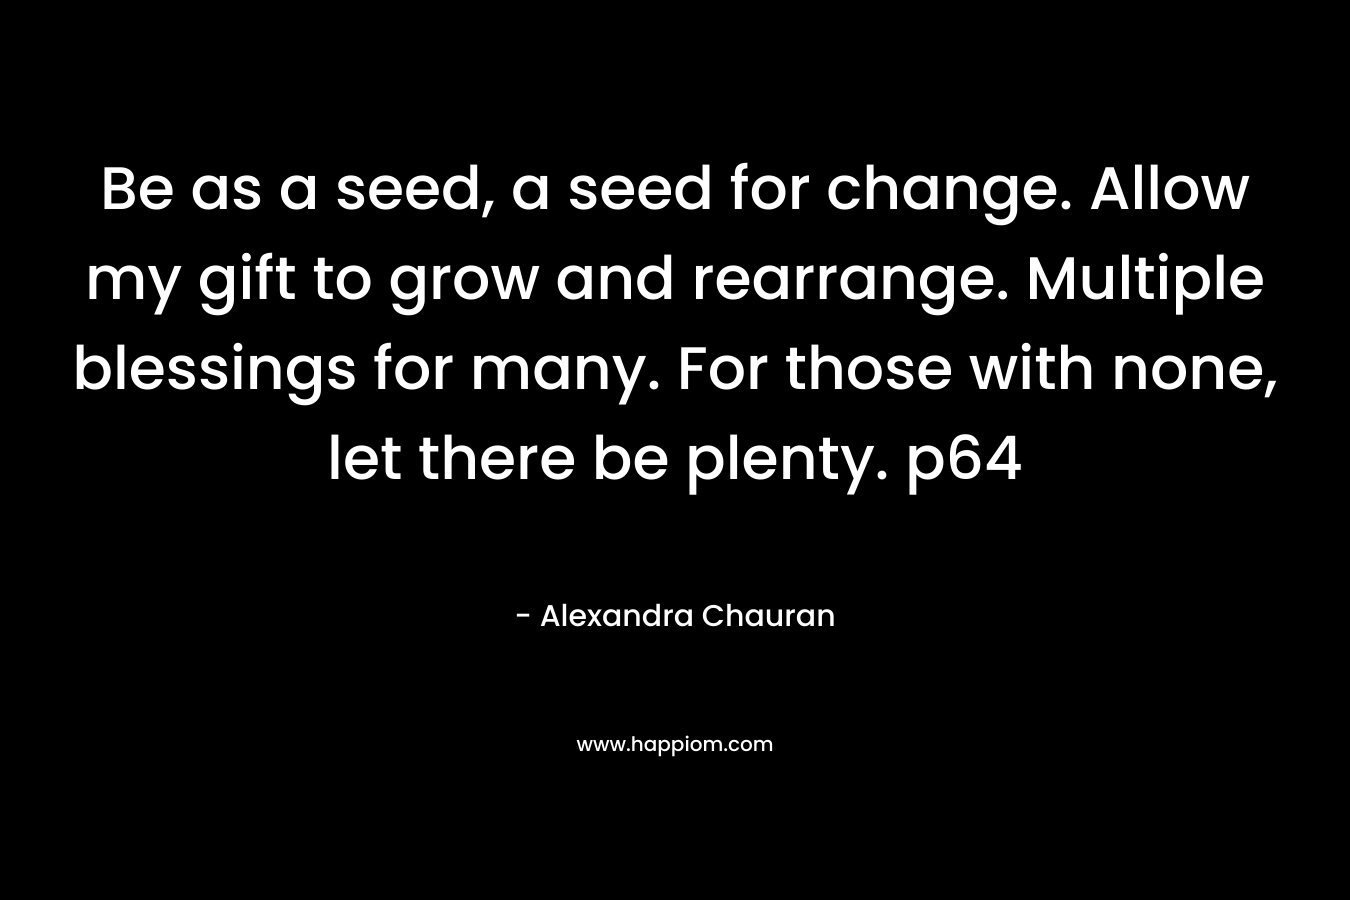 Be as a seed, a seed for change. Allow my gift to grow and rearrange. Multiple blessings for many. For those with none, let there be plenty. p64